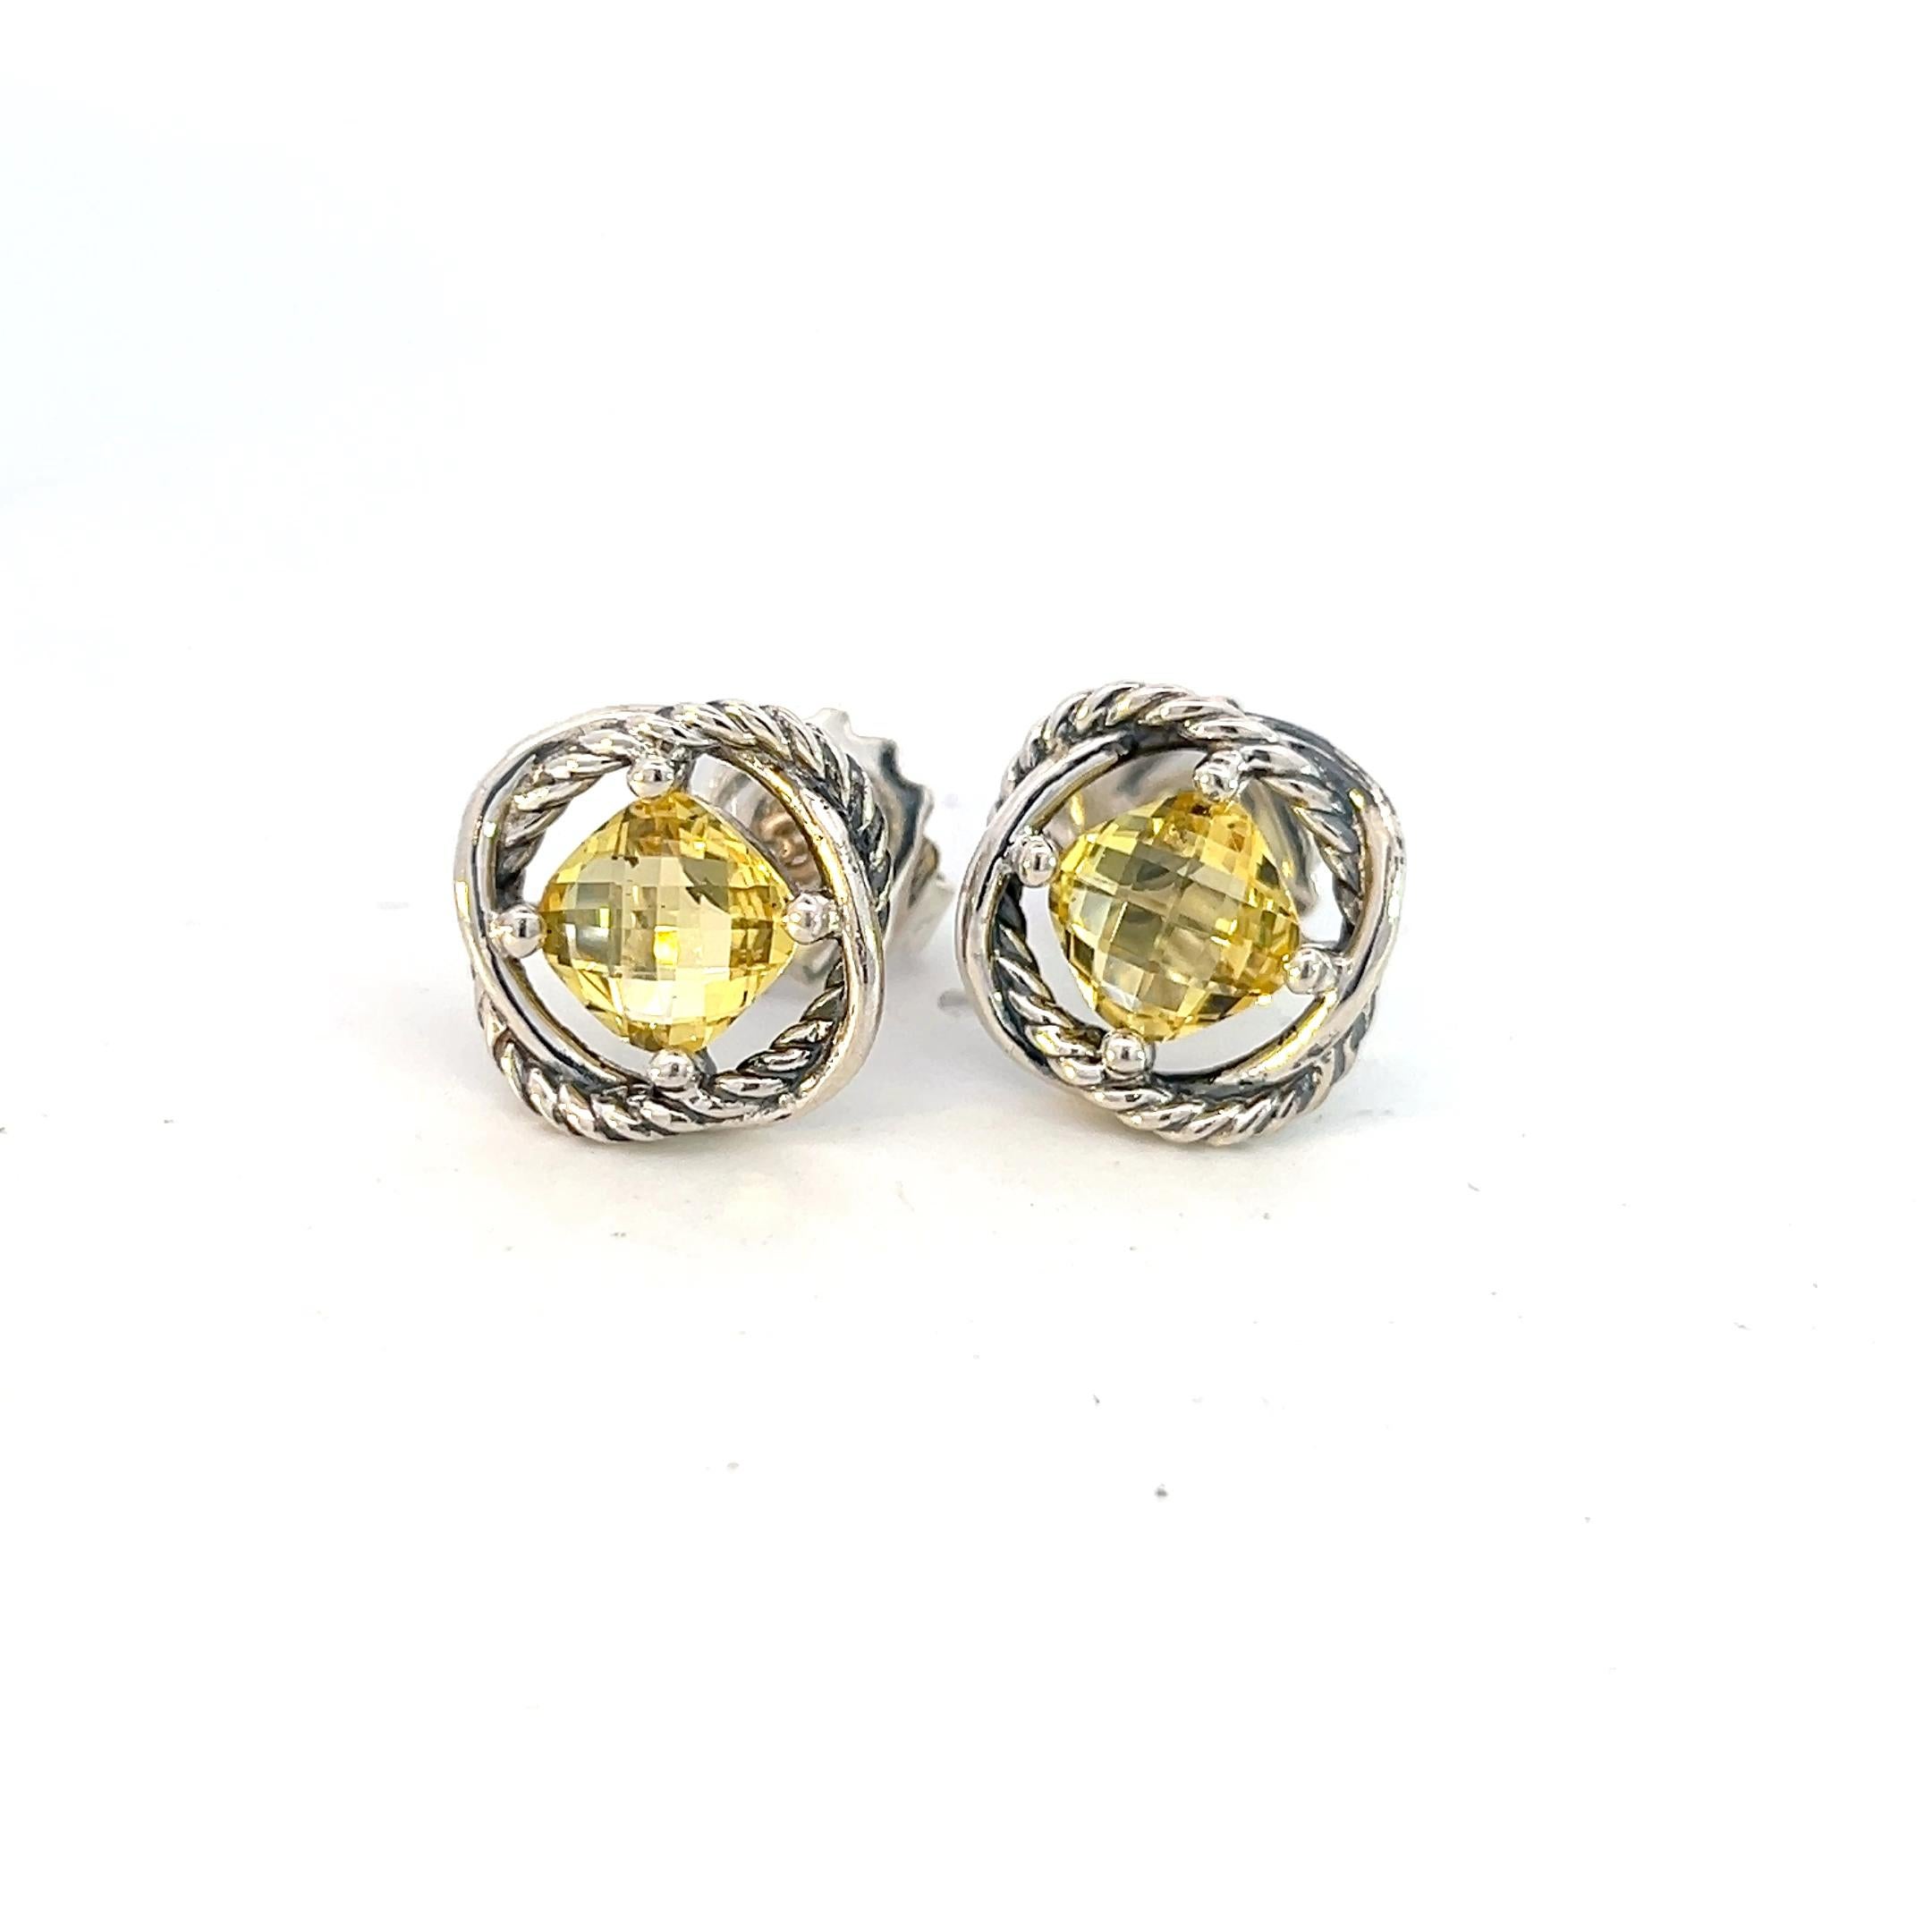 David Yurman Authentic Estate Citrine Infinity Earrings 14k Gold Silver In Good Condition For Sale In Brooklyn, NY